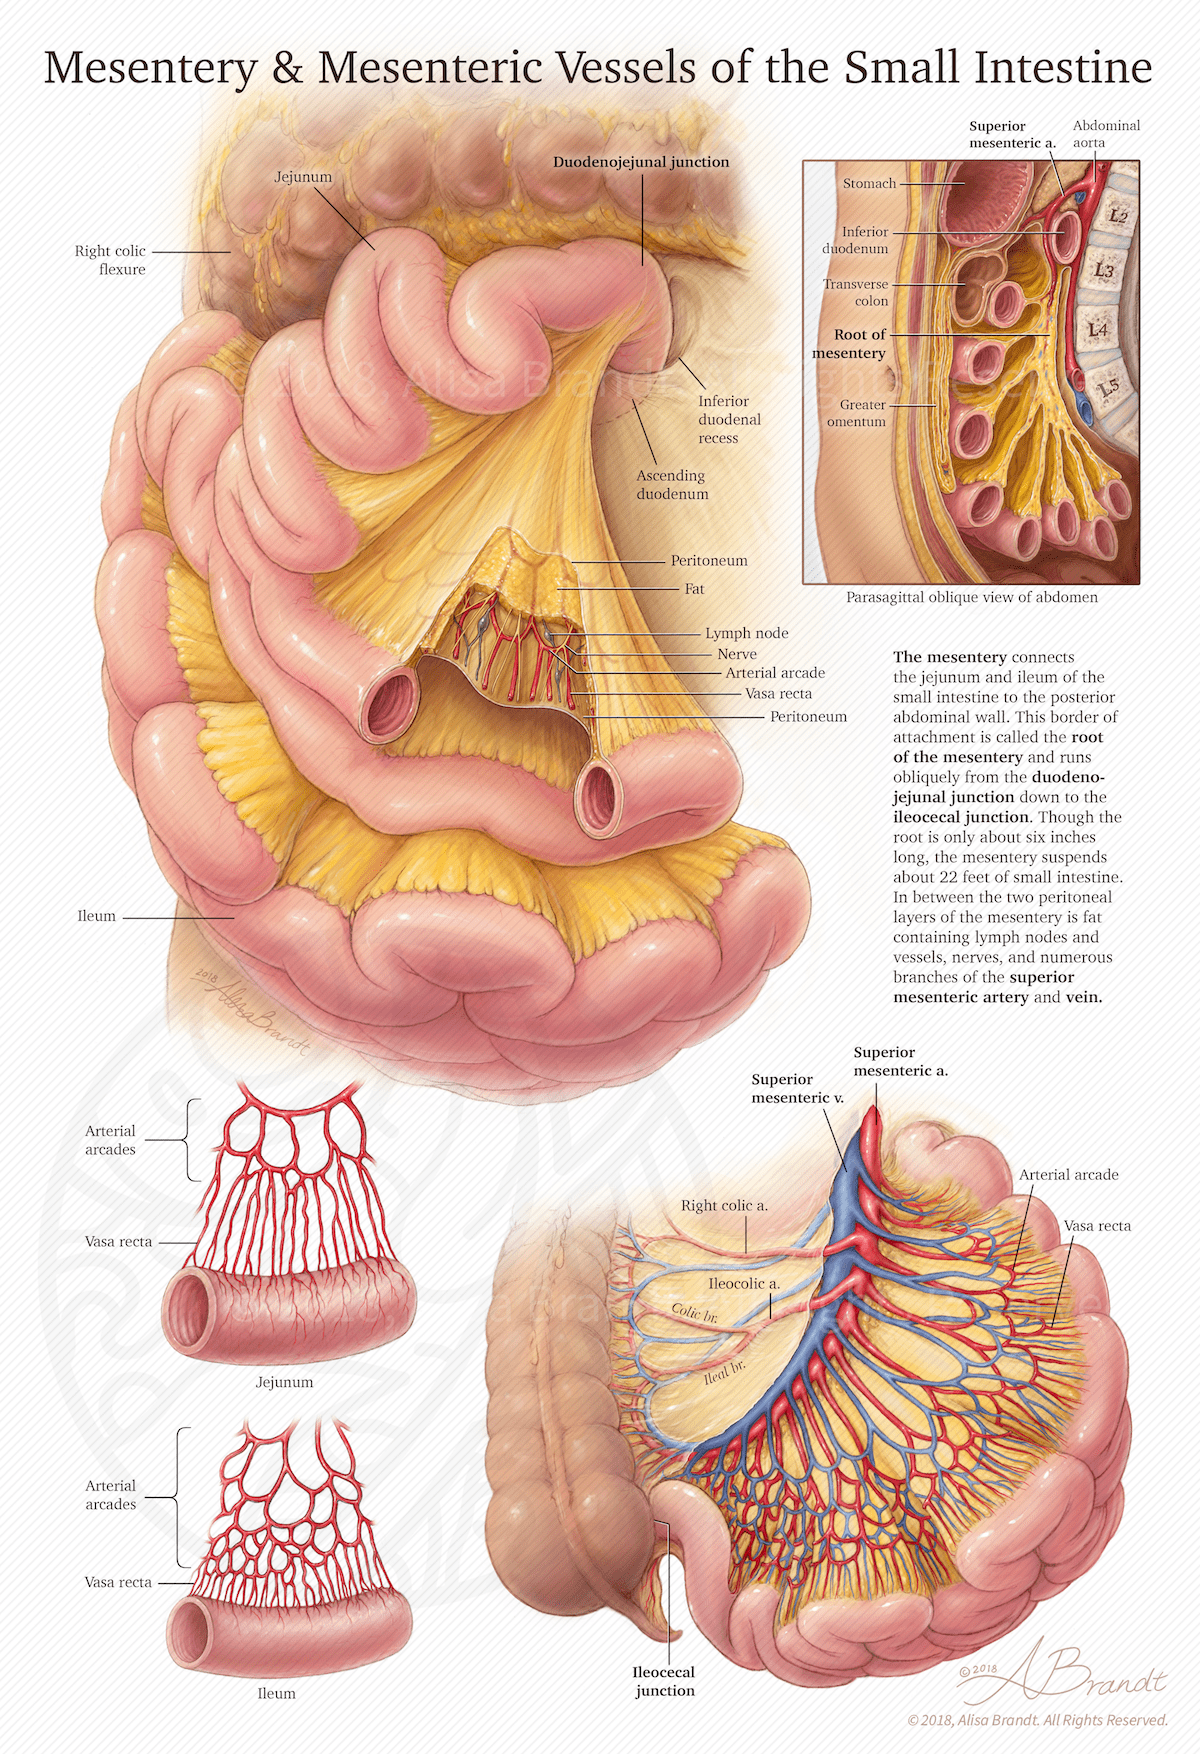 An illustration from Alisa's portfolio depicting the anatomy of the mesentery and mesenteric vessels of the small intestine, created during her studies at Johns Hopkins.